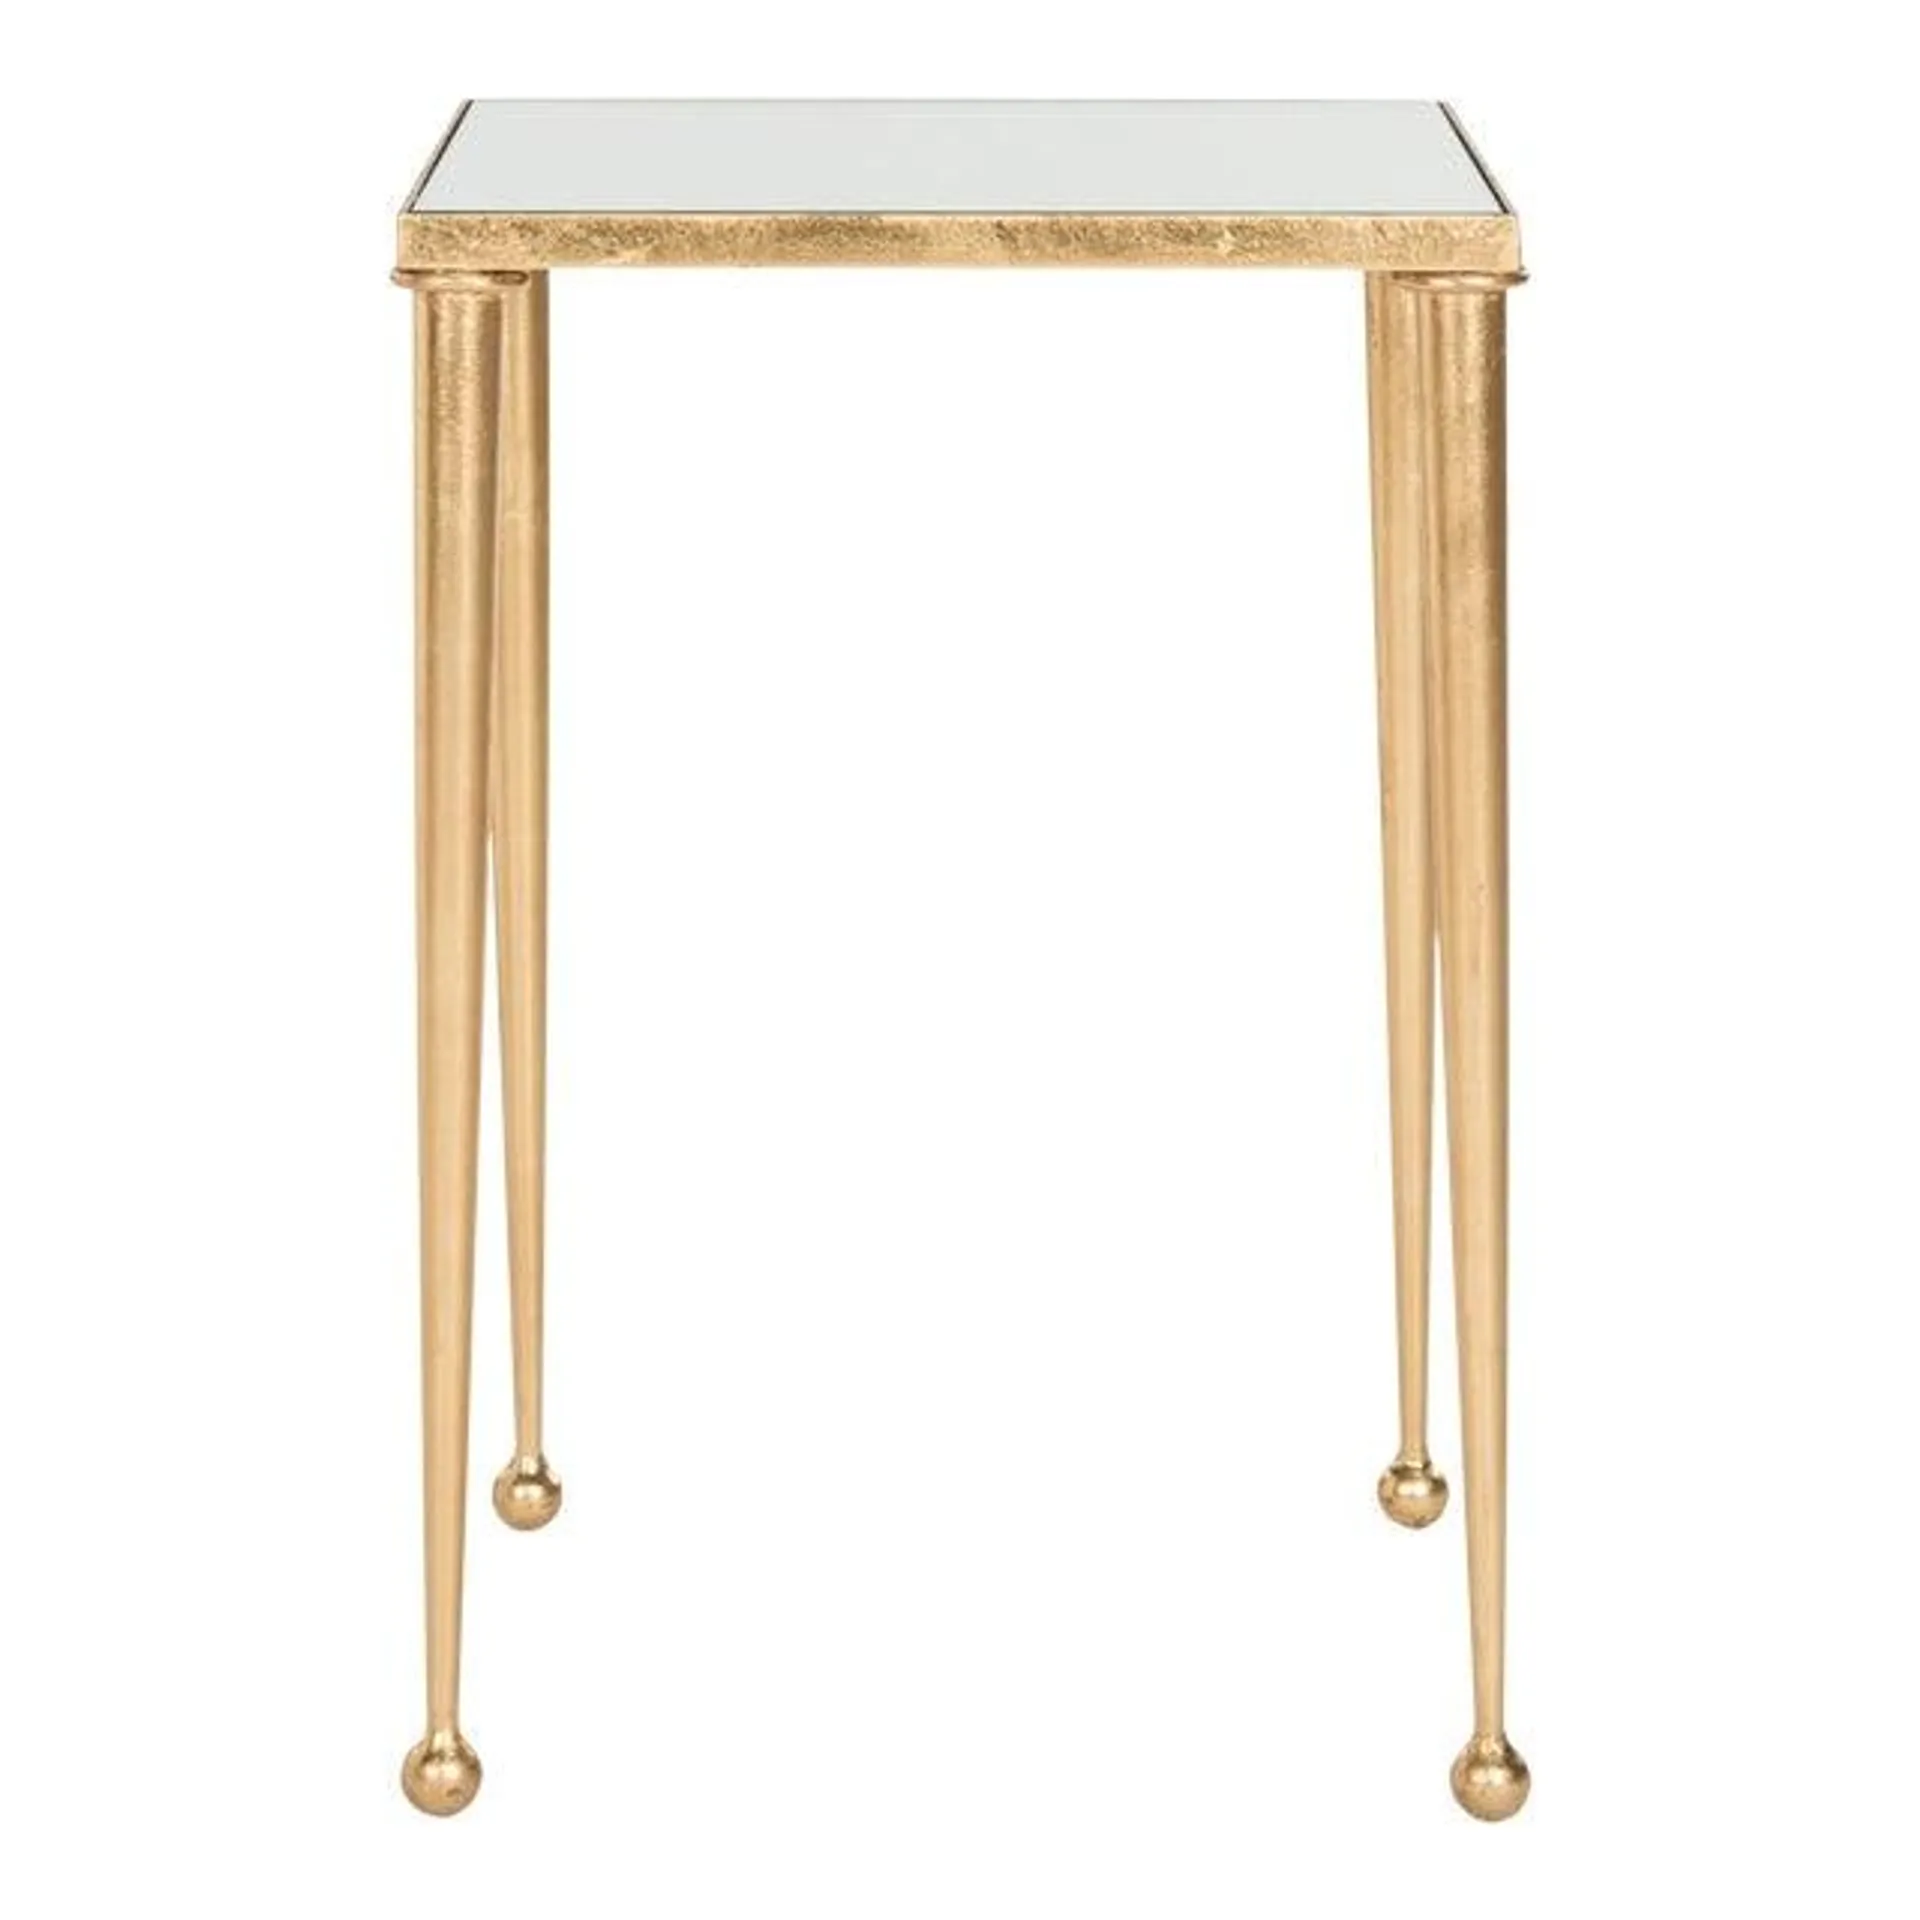 Cameron Mirror Top End Table in Antique Gold